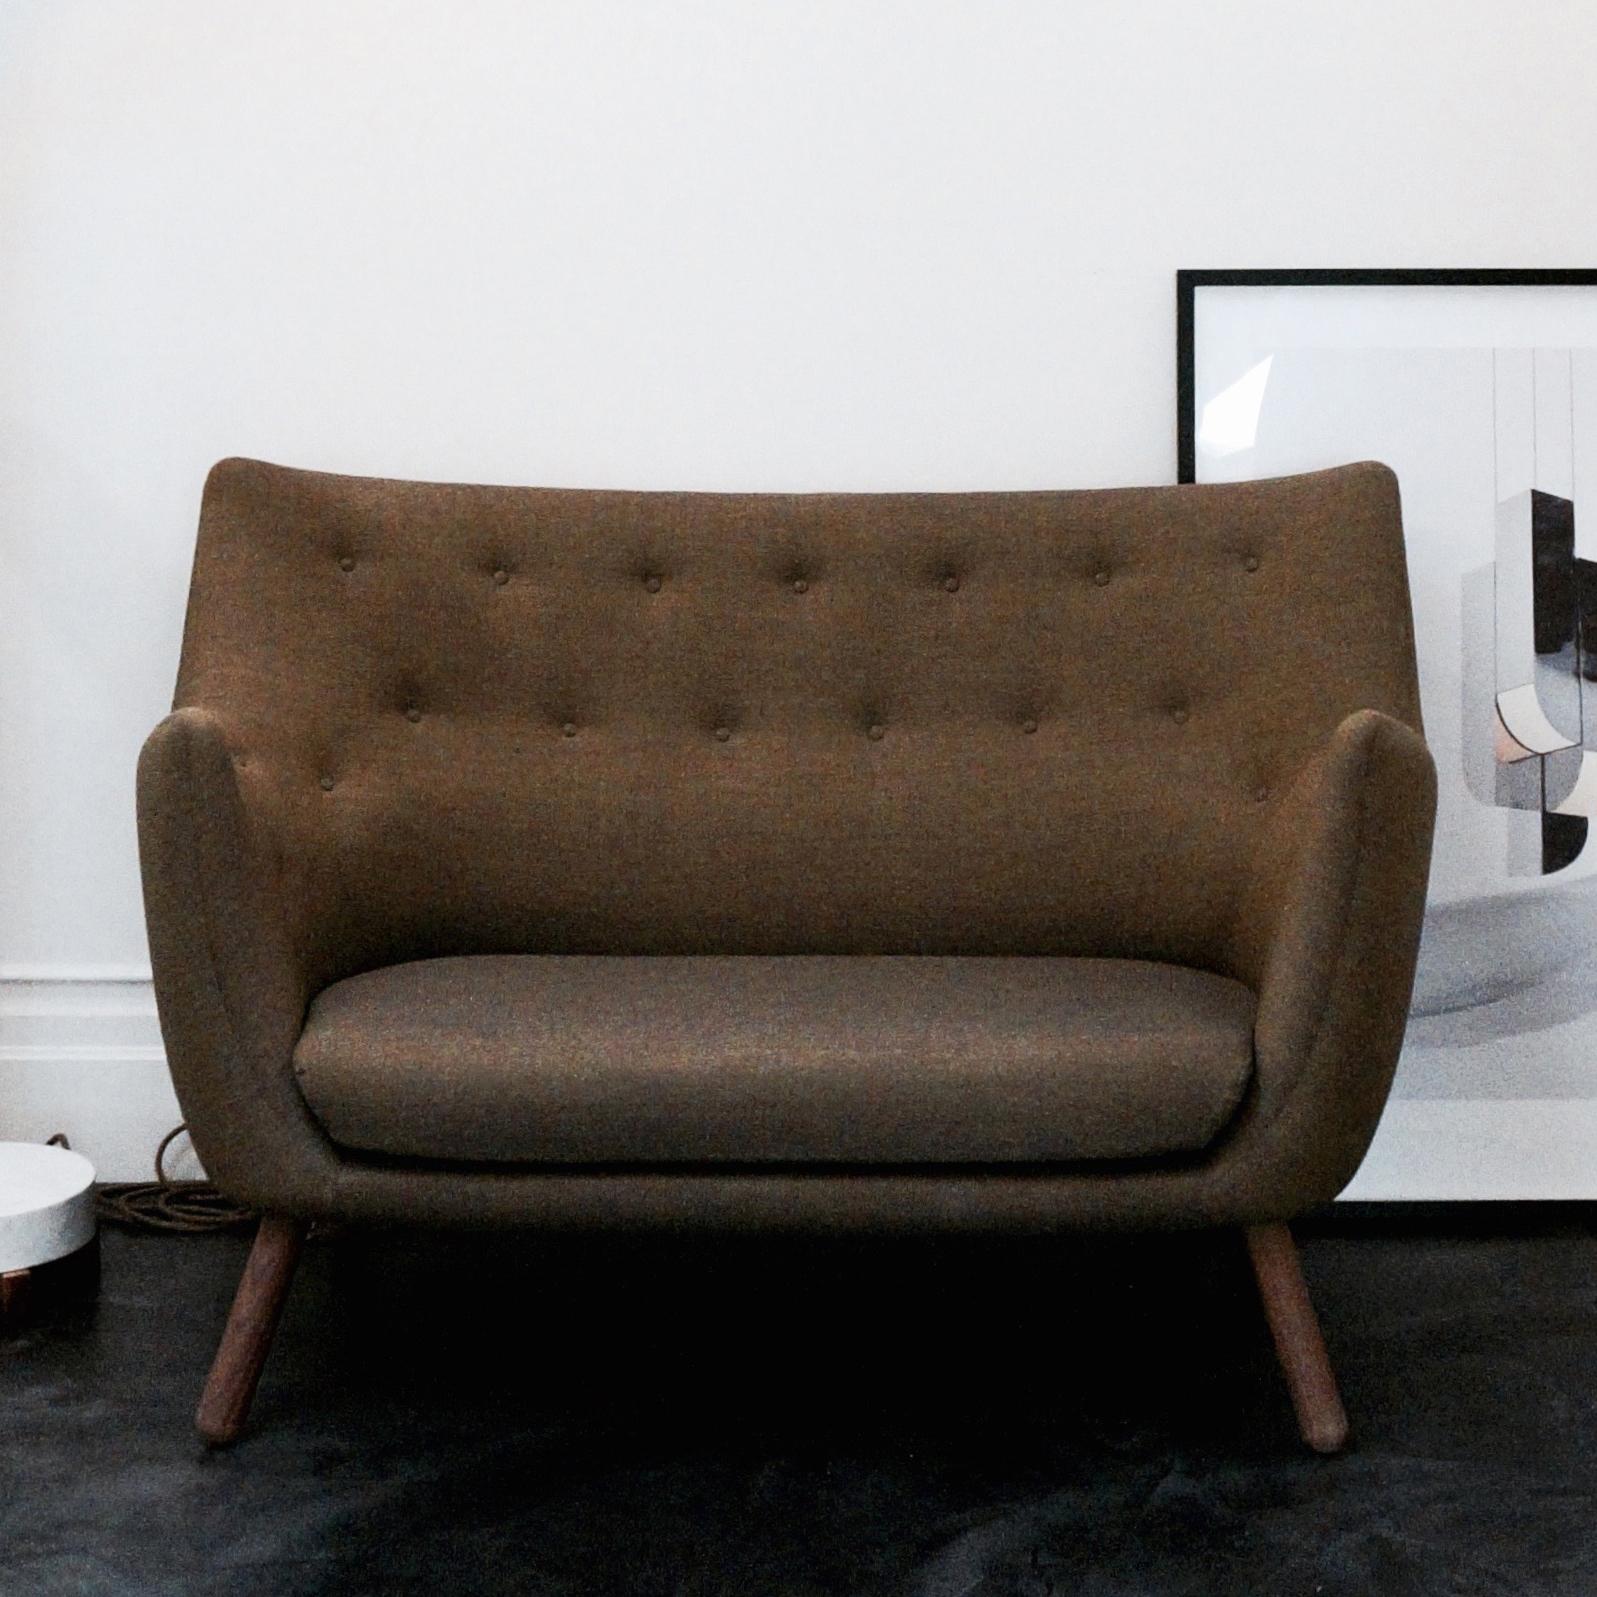 Sofa designed by Finn Juhl in 1946, relaunched in 2008.
Manufactured by House of Finn Juhl in Denmark.

This small two-seater sofa first saw the light of day at the Copenhagen Cabinetmakers’ Guild Exhibition in 1941. It should be seen as a natural